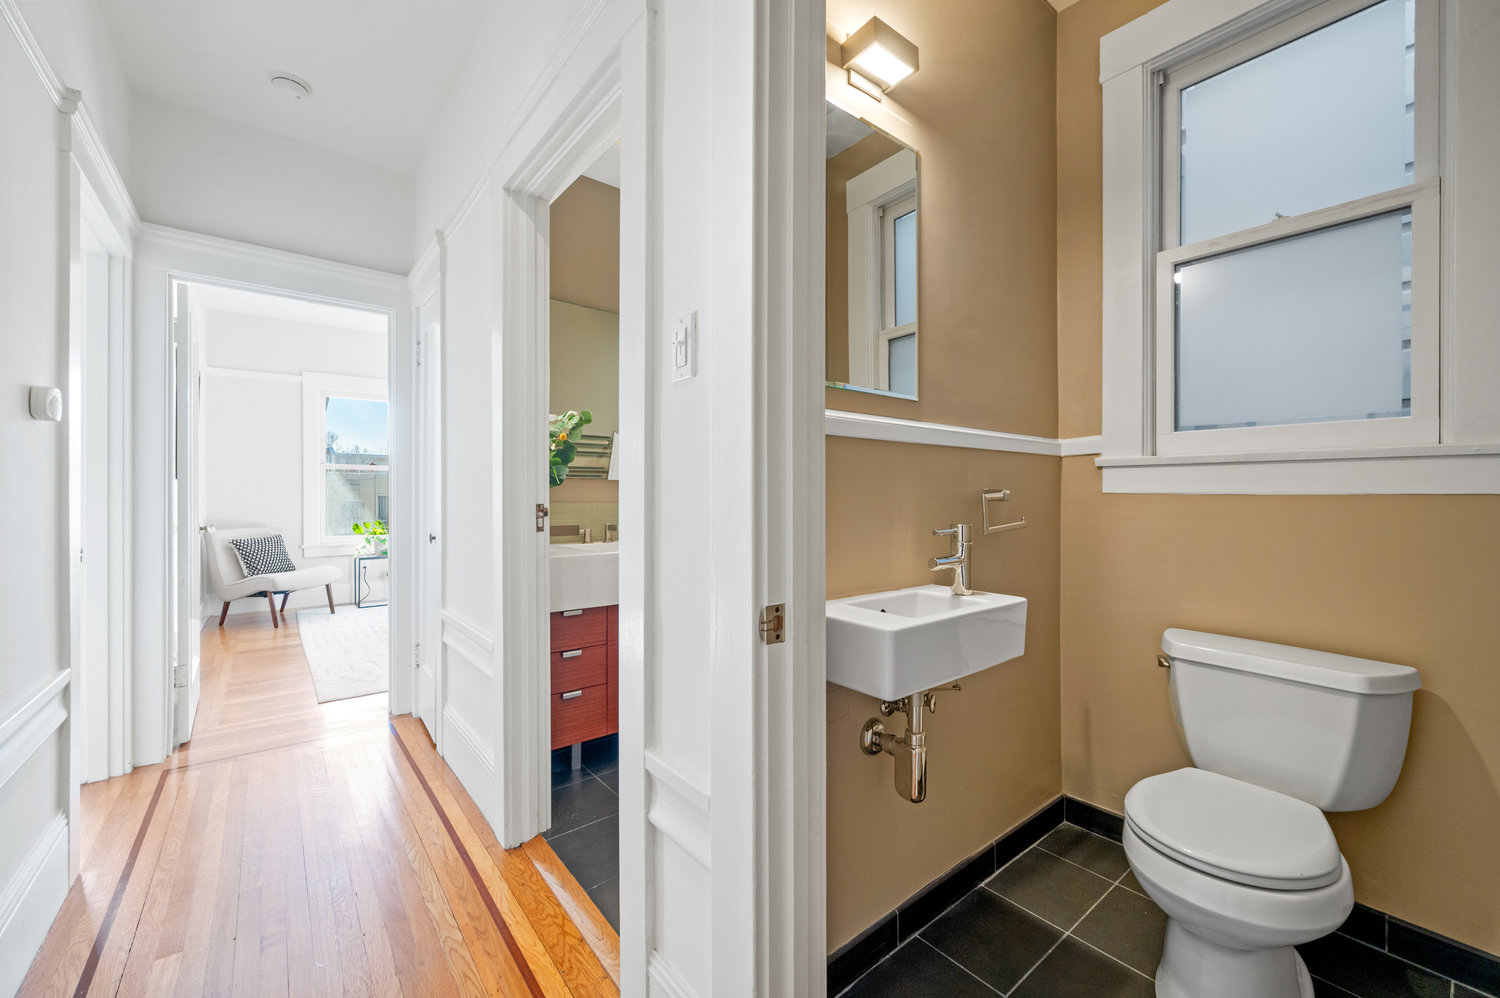 Property Photo: Looking in to updated half bath. There is a window with frosted glass above toilet.